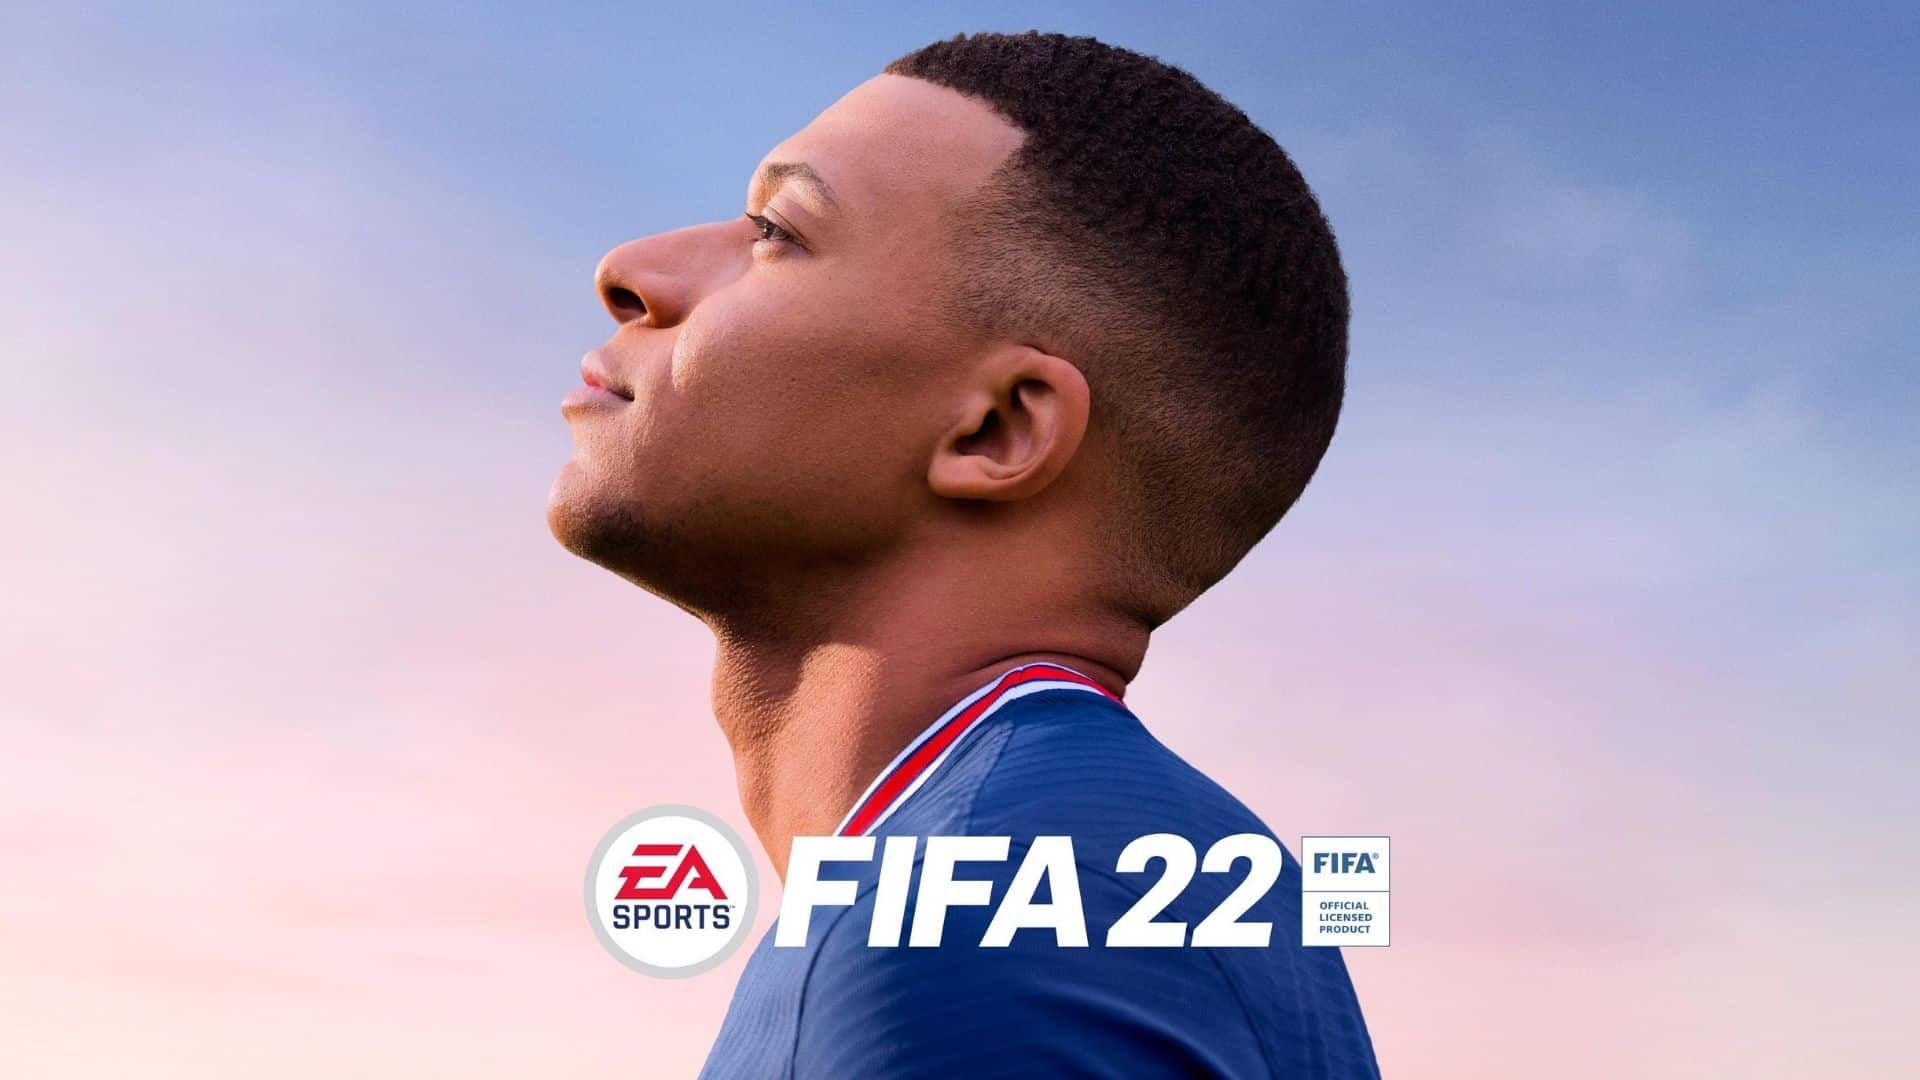 FIFA 22 cover image of Mbappe looking skywards